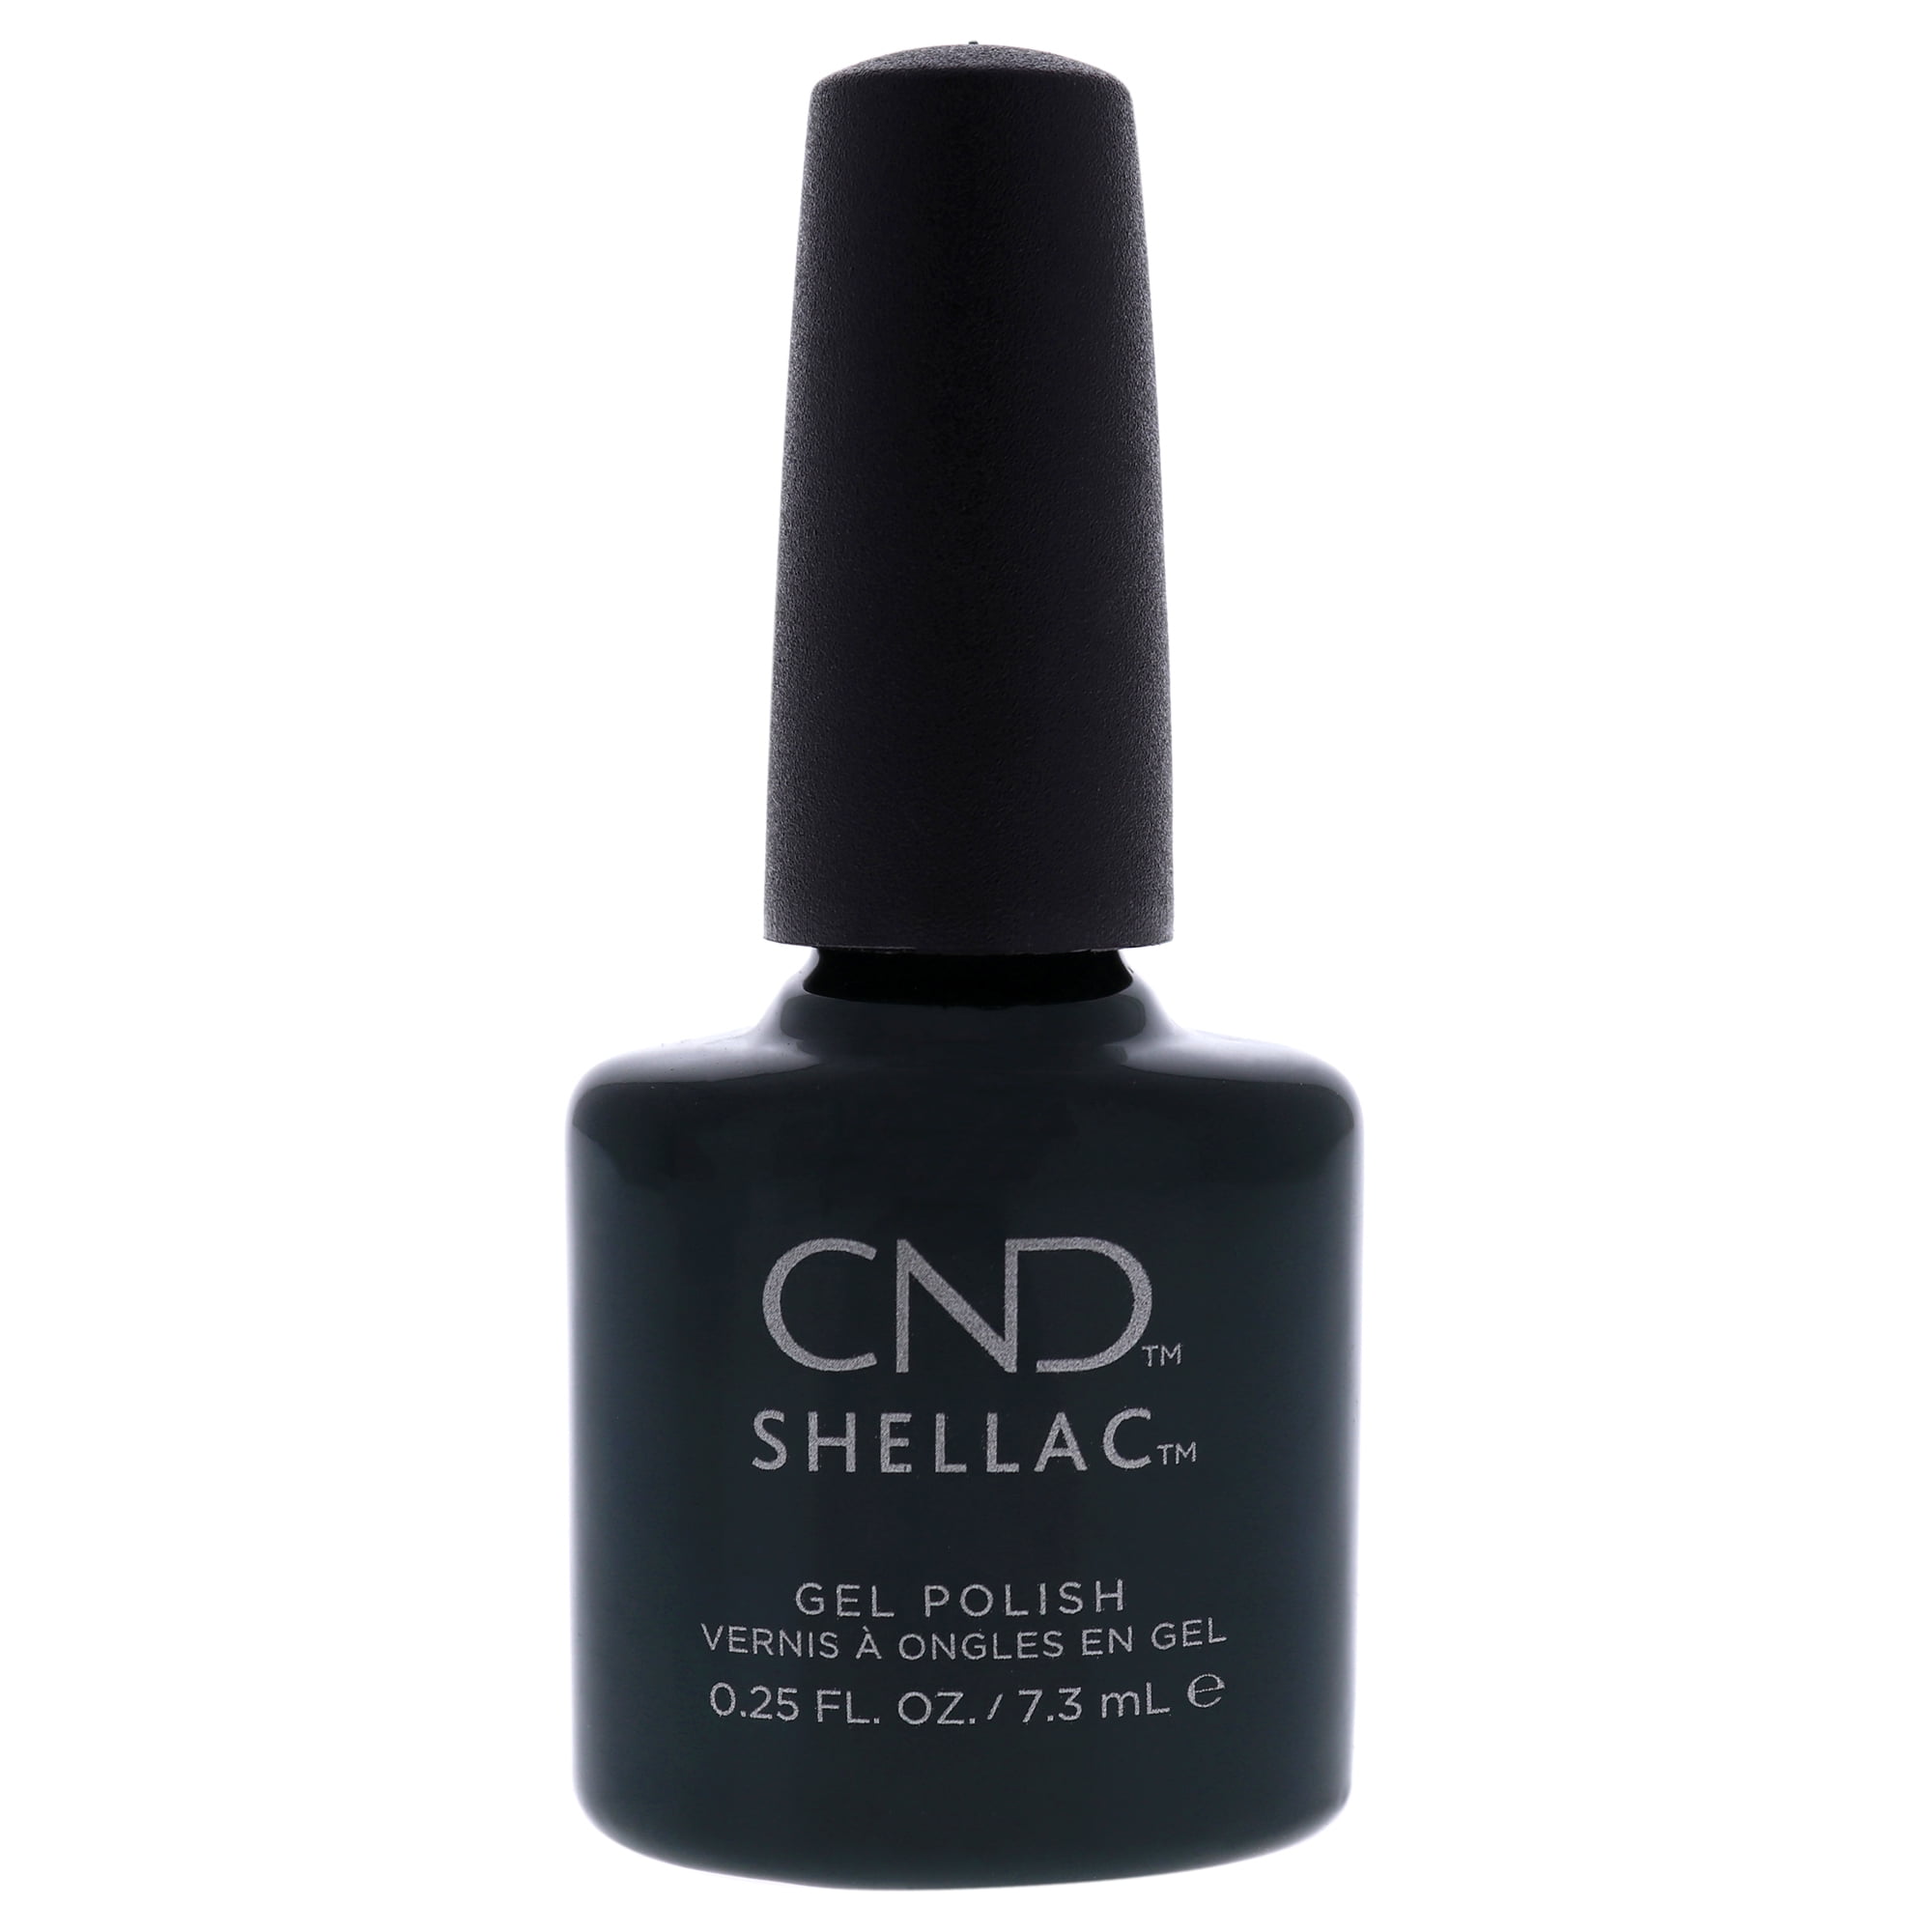 How To Apply & Remove Gel Nail Polish At Home - Using CND Shellac